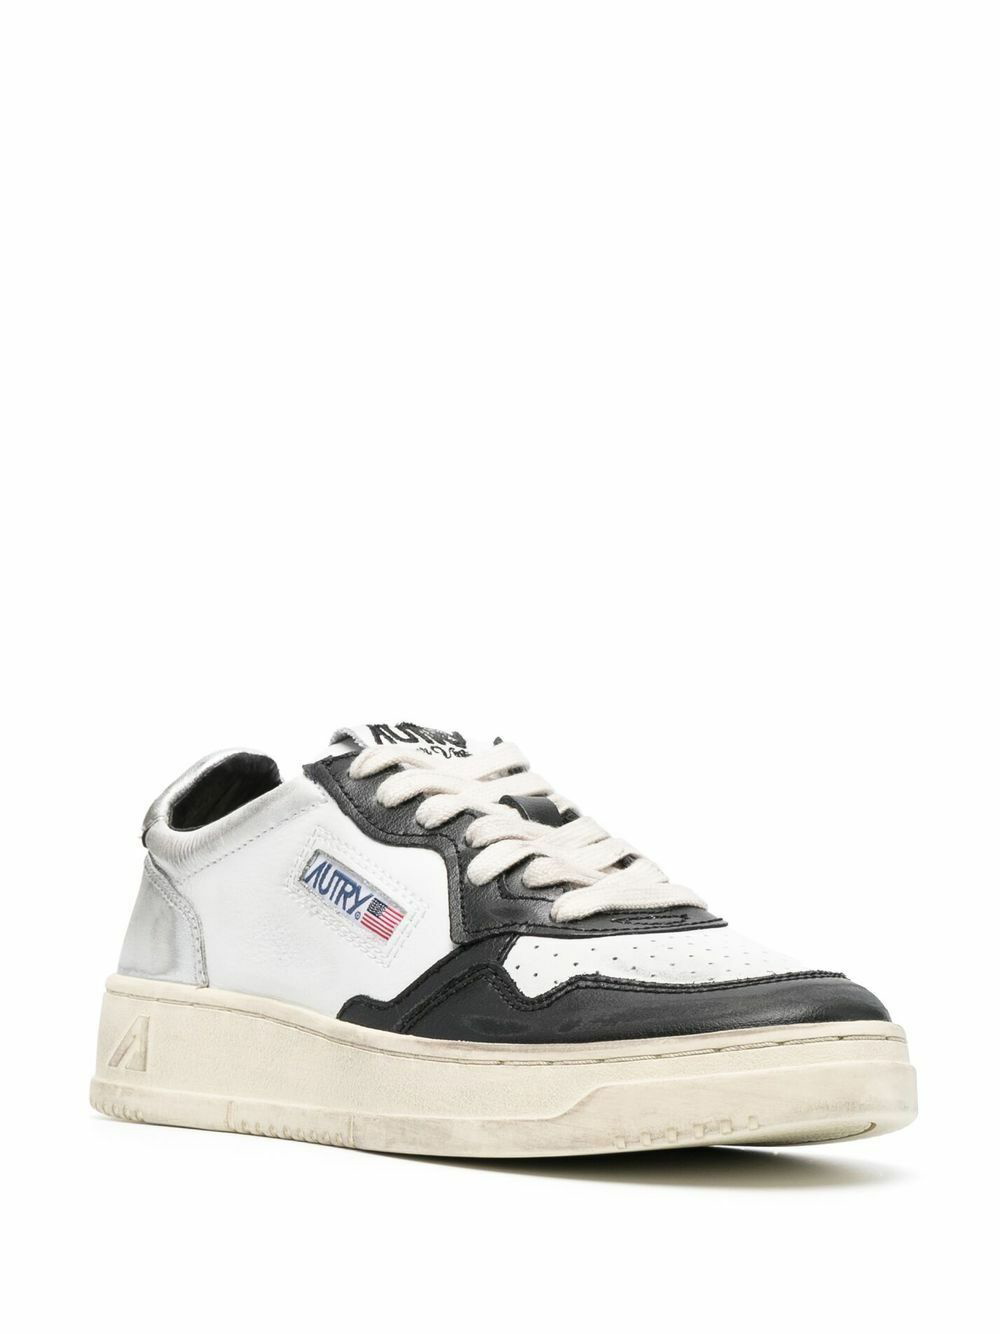 AUTRY - Super Vintage Low Leather Sneakers Autry